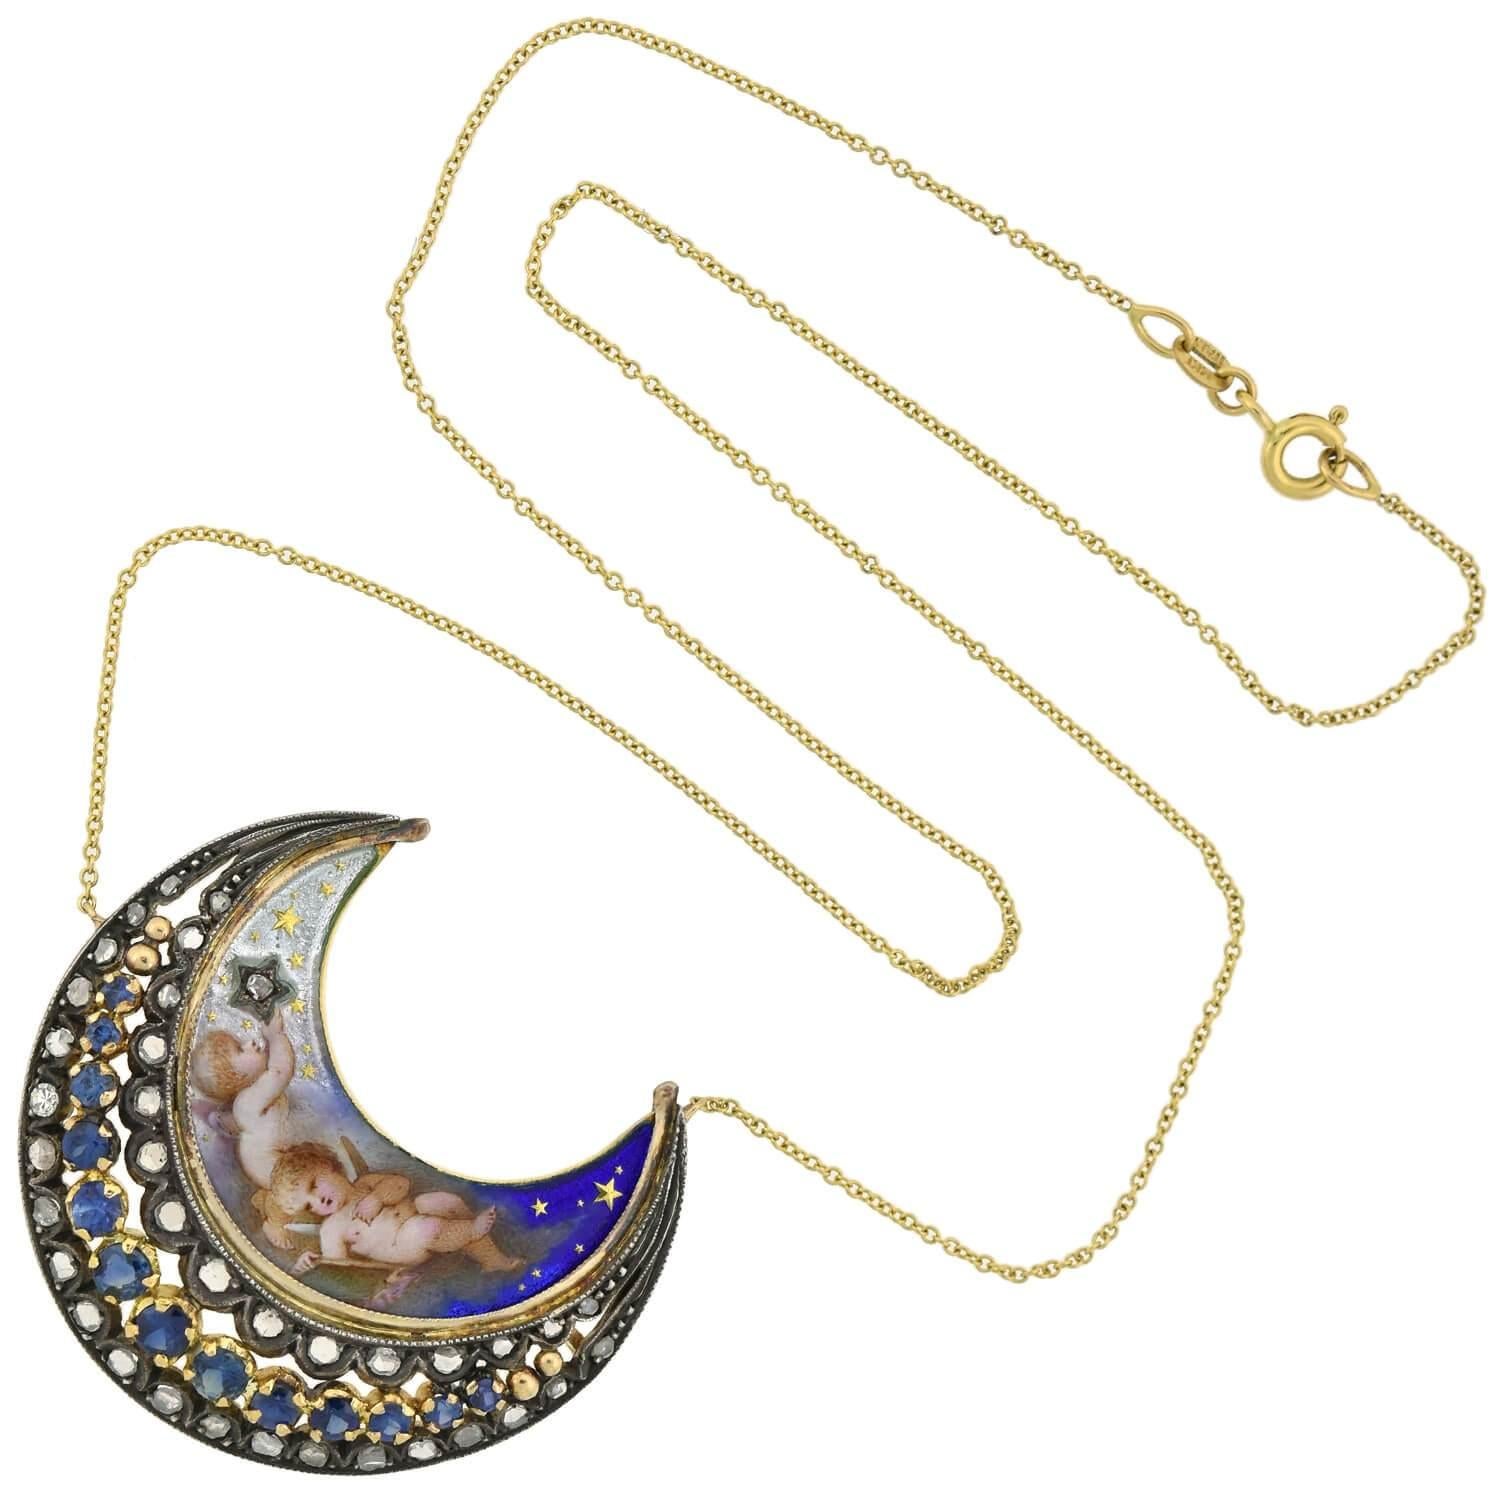 An absolutely breathtaking enameled gemstone crescent pendant necklace from the Early Victorian (ca1850s) era! Originally an antique pin, this 18kt yellow gold and sterling silver crescent has been expertly converted into a gorgeous pendant that now